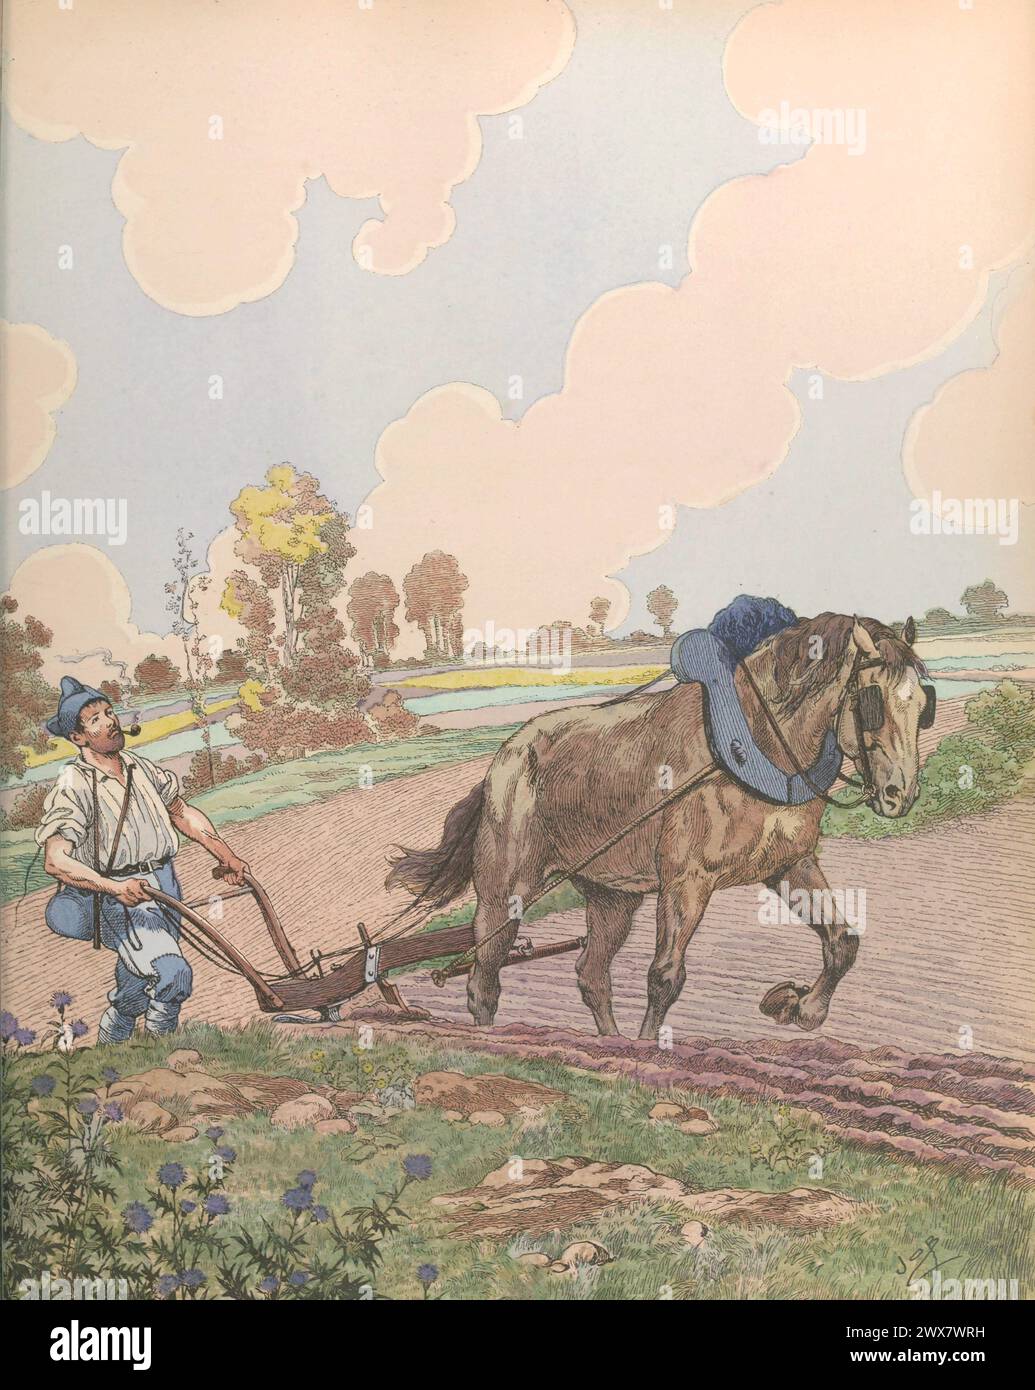 Back to the land: French peasant returning to work after the First World War.  Illustration by Job published in the book 'Allons, Enfants de la Patrie !...' by Jean Richepin. Published by A. Mame et fils in 1920. Stock Photo